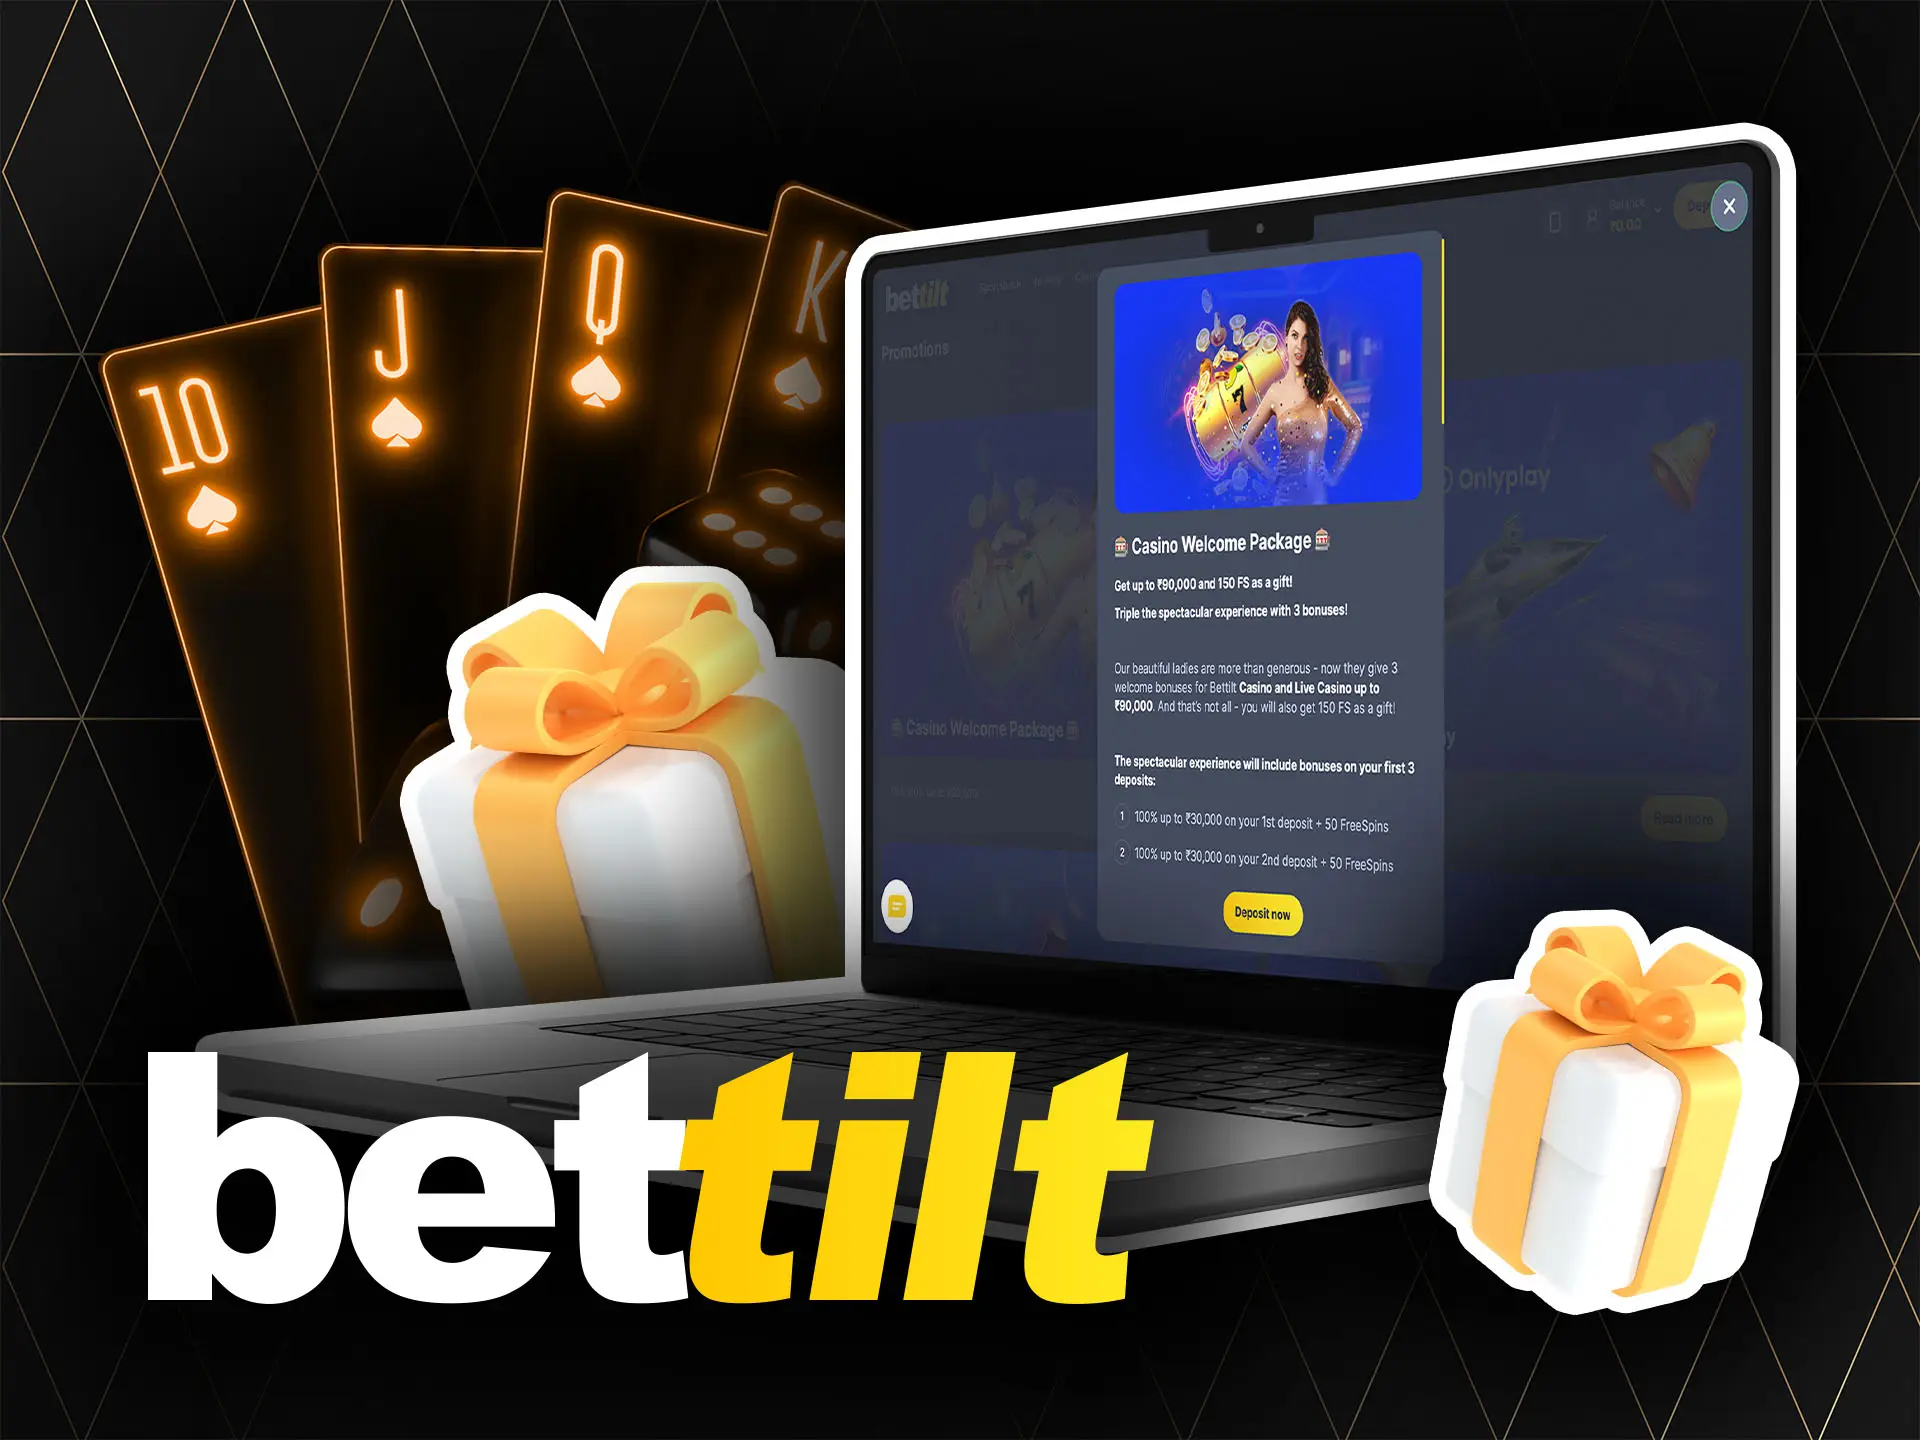 Get a 100% bonus after your first deposit and spend it on the casino games.